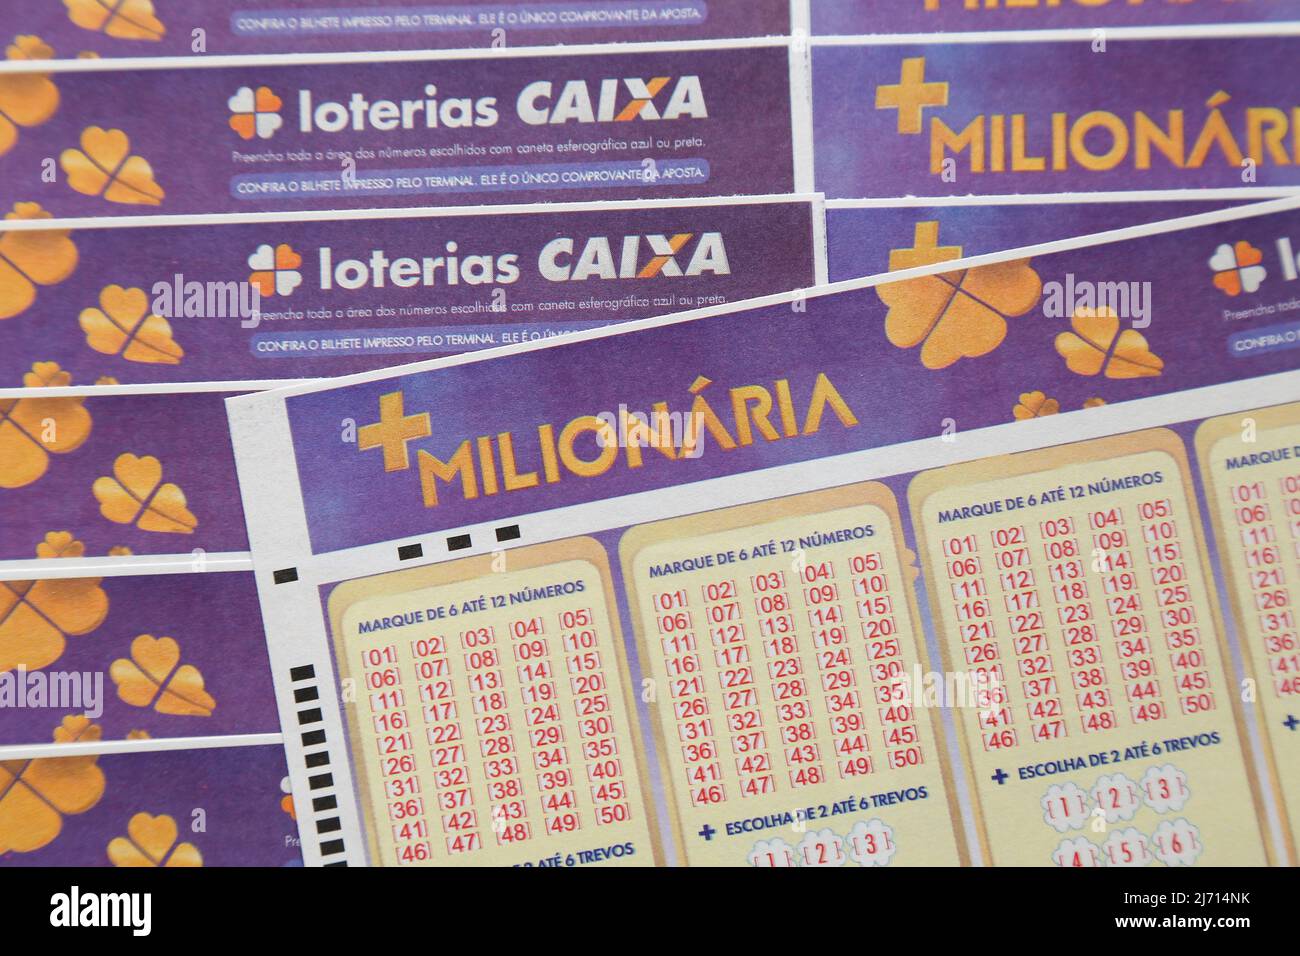 Fortunate Events: Brazilian Lottery Enthusiasts Win Big with Lotofácil